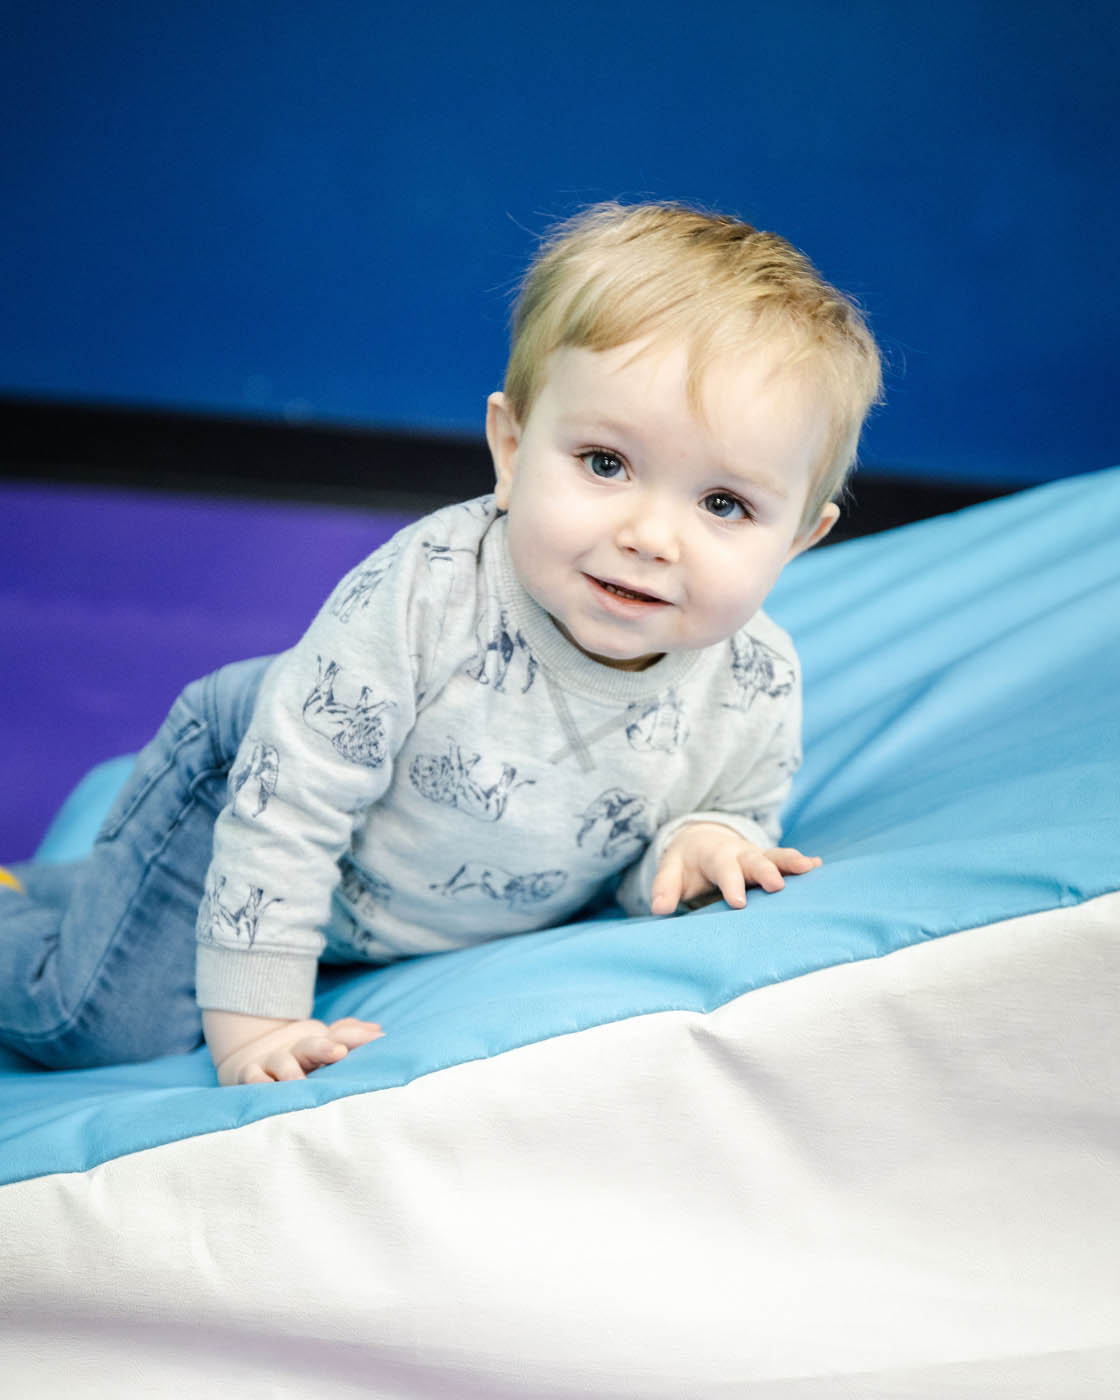 A boy balancing and climbing on our padded gym equipment - learn all about starting a childrens gym with Romp n' Roll!